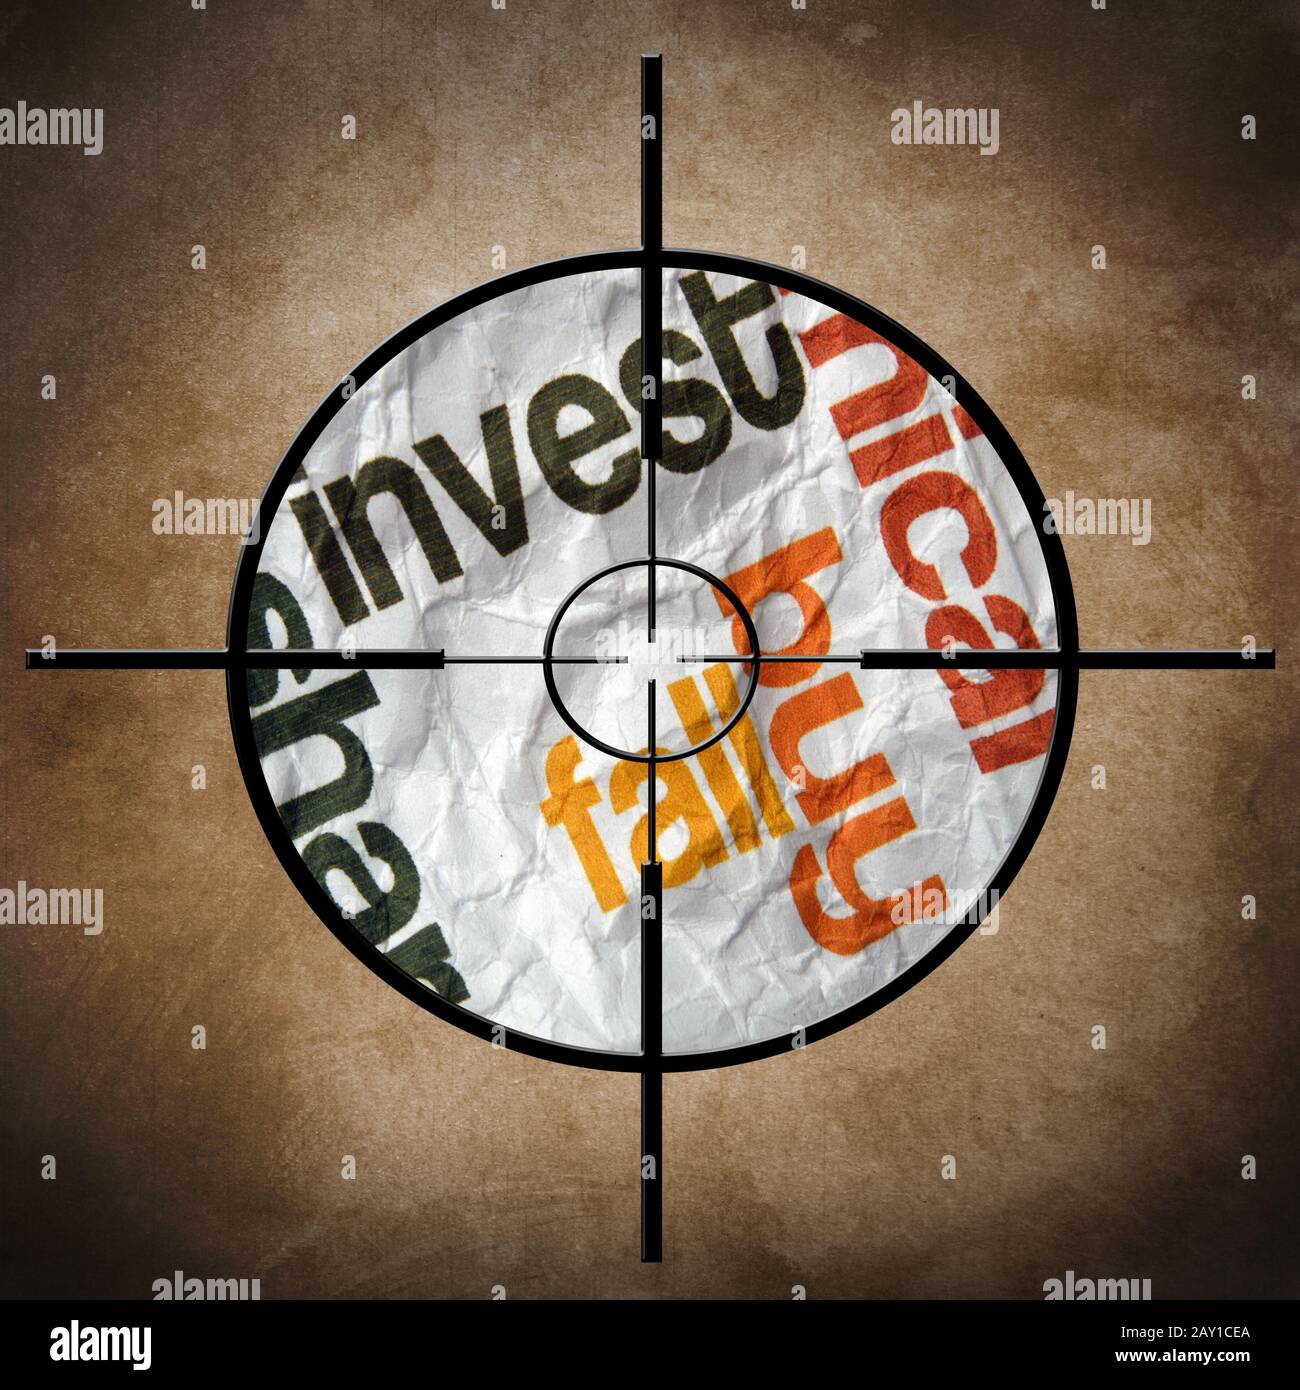 Invest fall target concept Stock Photo